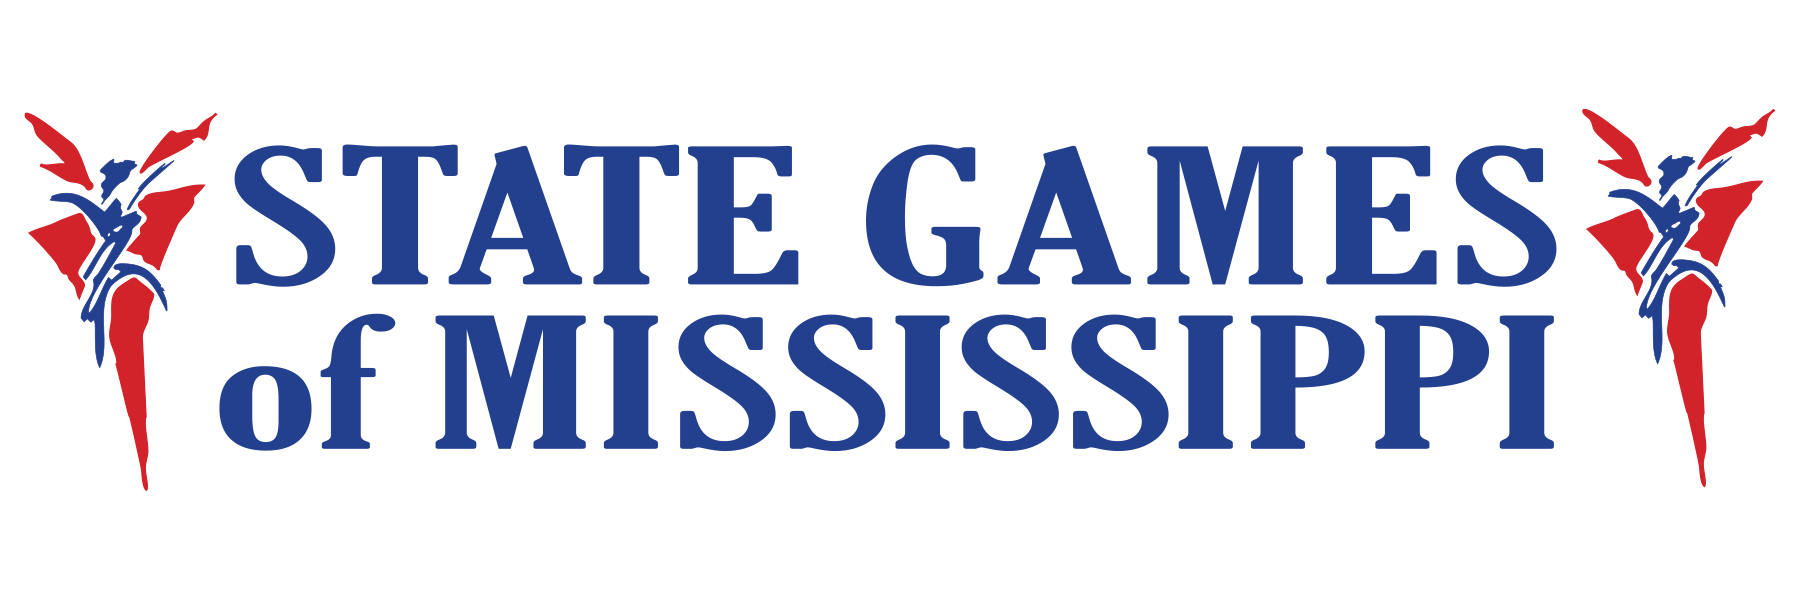 State Games of Mississippi